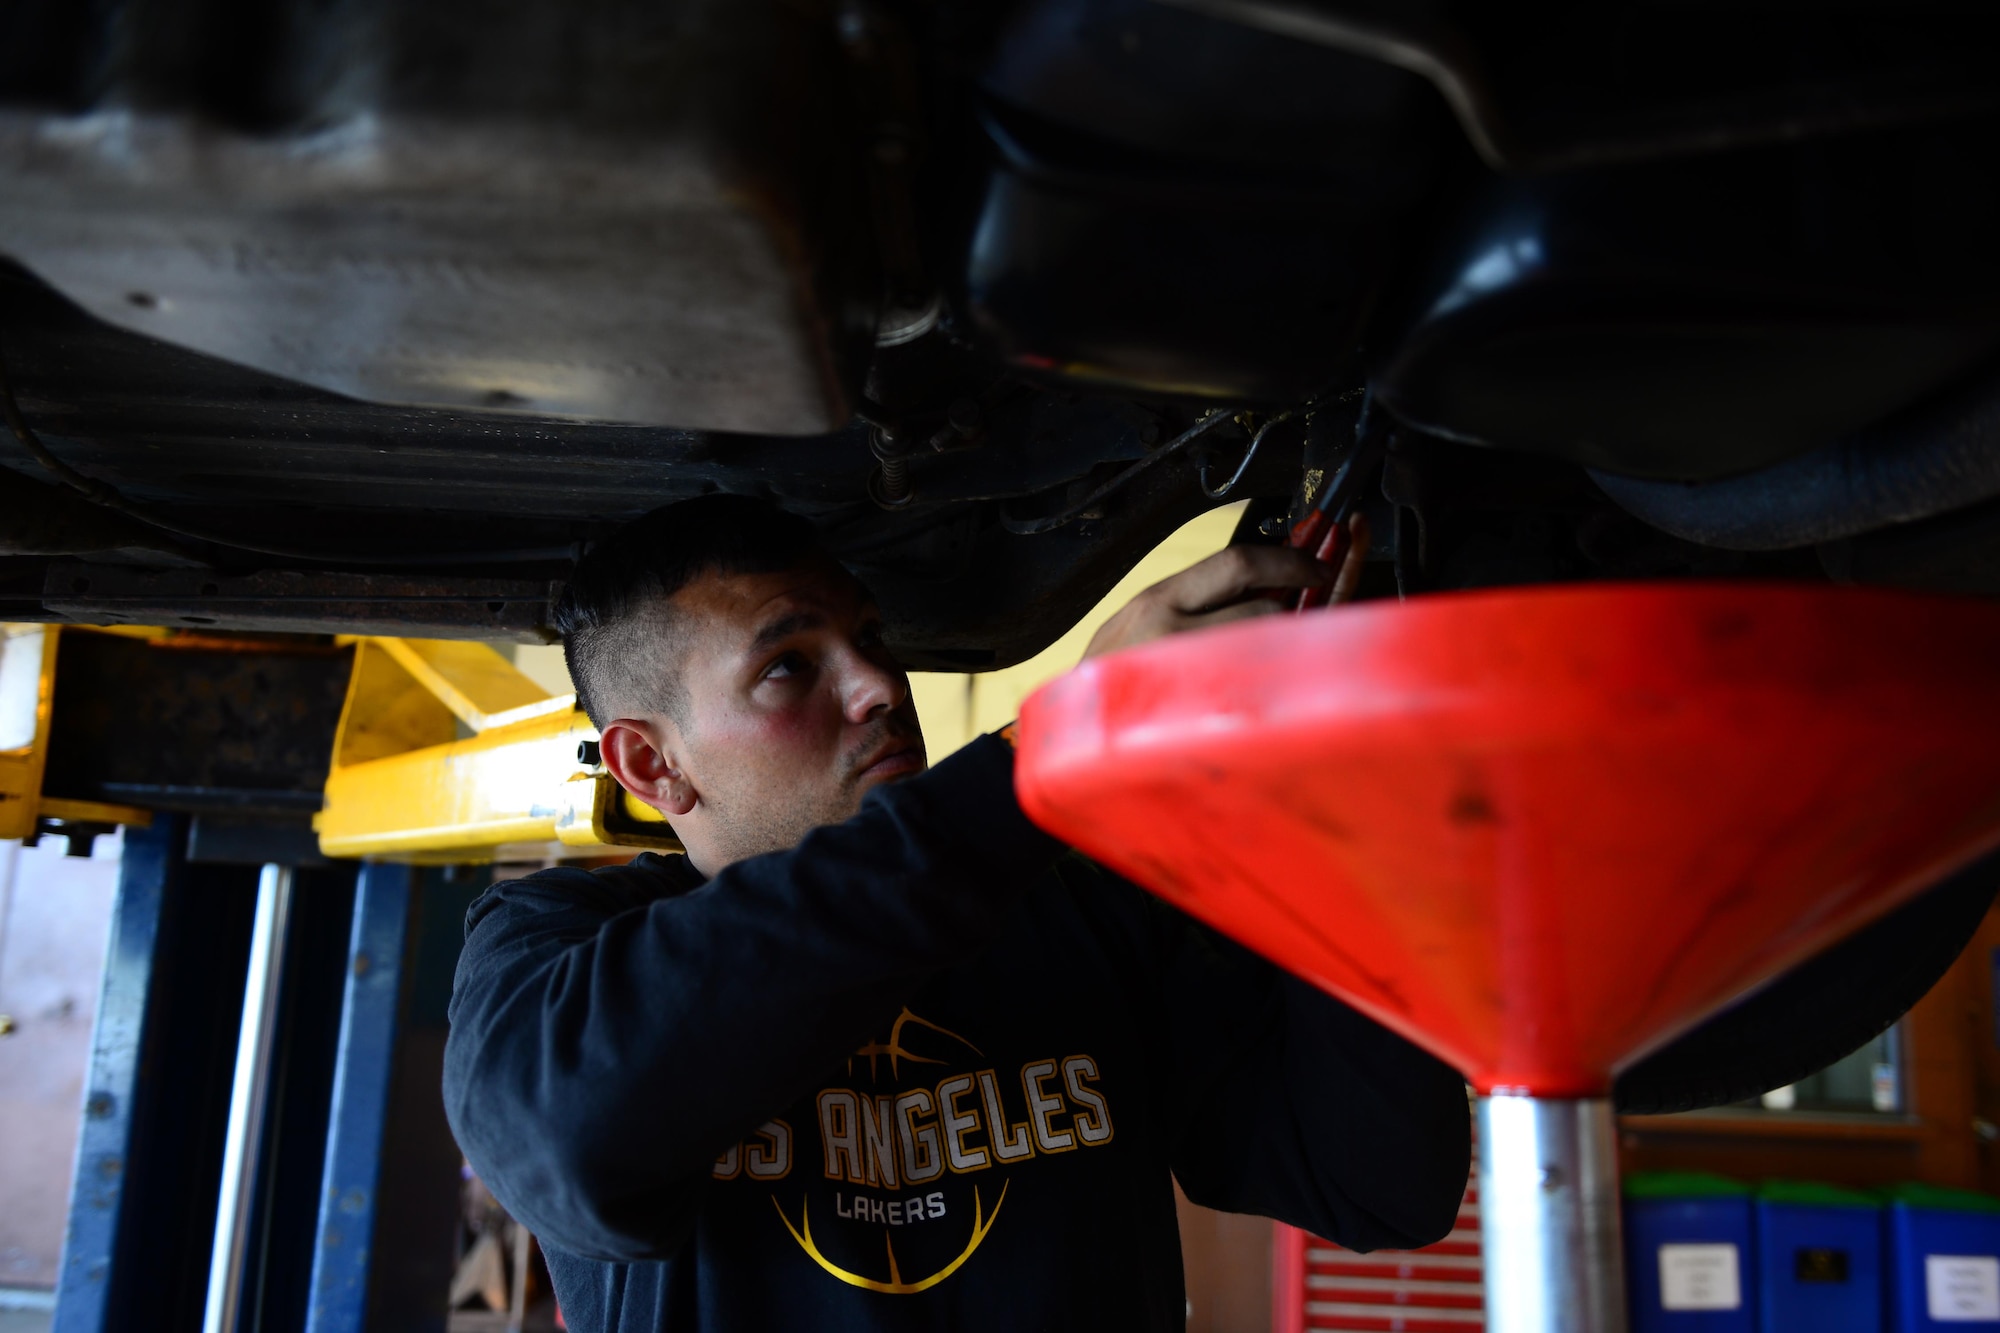 Airman 1st Class Chris Avila, 36th Logistics Readiness Squadron fuels distribution operator, removes an oil filter from his vehicle March 5, 2016, at the Auto Hobby Shop on Andersen Air Force Base, Guam. The shop offers classes that teach customers to align their vehicle, change oil, run diagnostic scans, replace brakes and repair tires. (U.S. Air Force photo/Airman 1st Class Jacob Skovo)